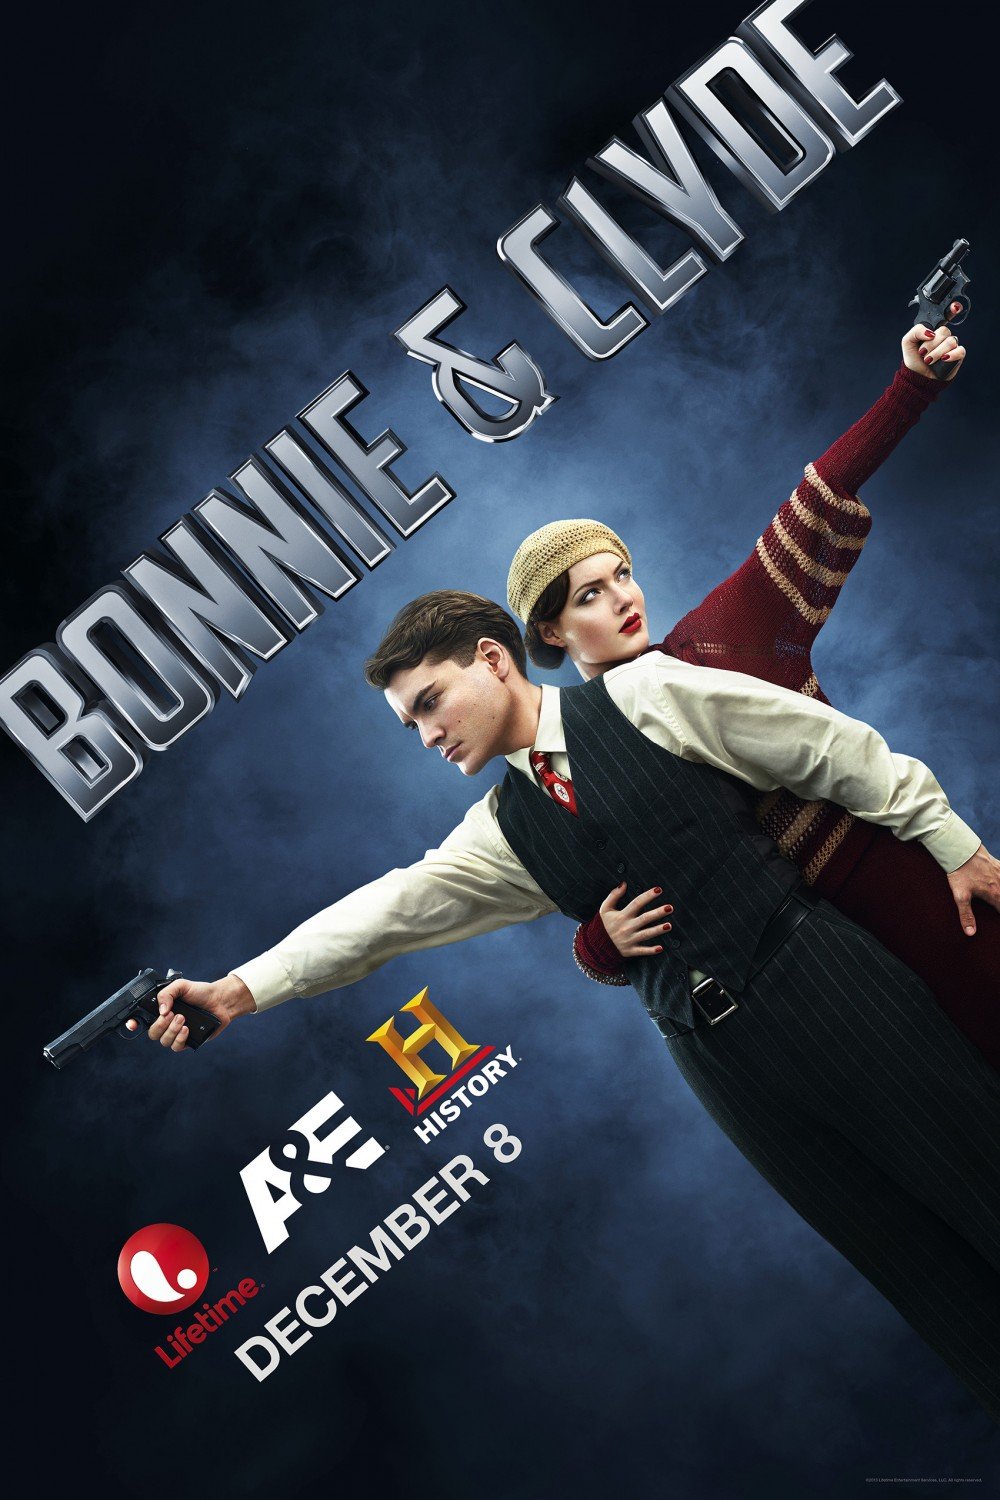 Poster of the movie Bonnie & Clyde